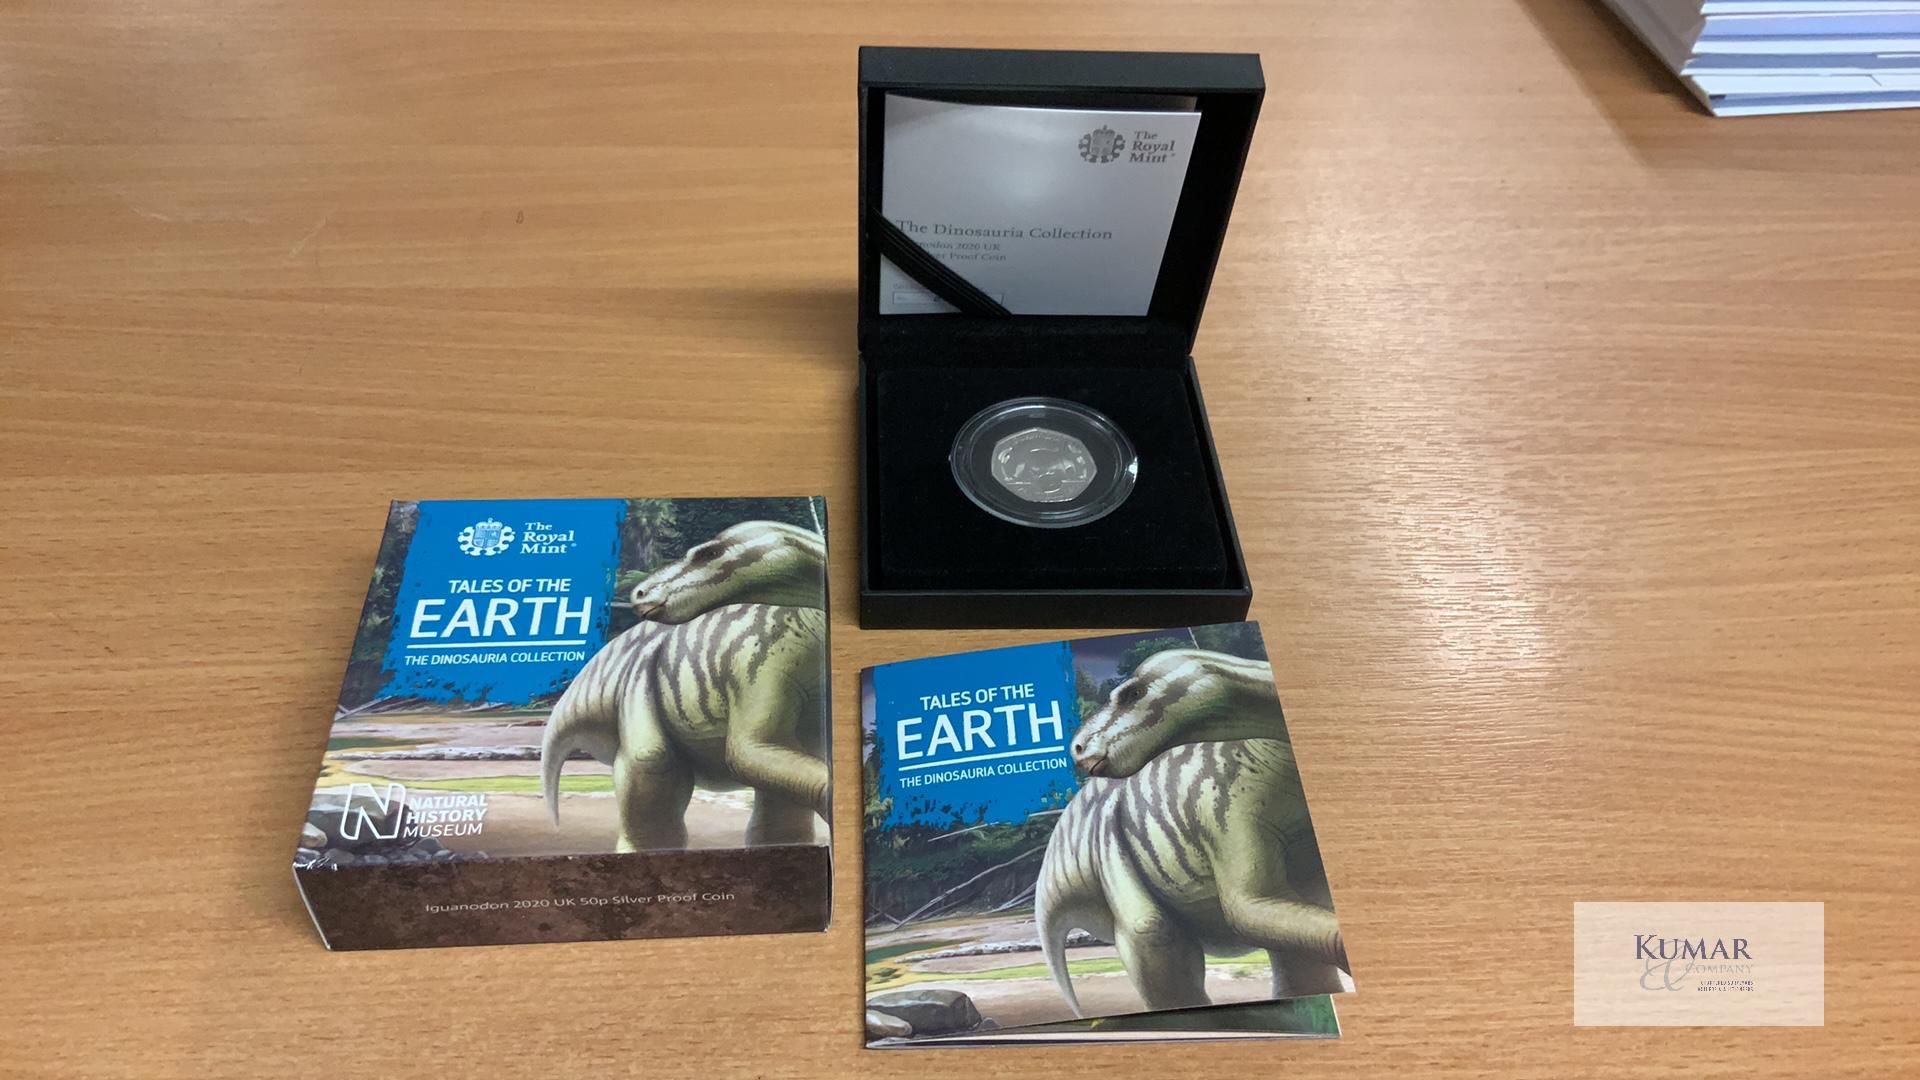 The Royal Mint Coin- Tales of the Earth - The Dinosauria Collection Iguanodon 2020 UK 50p Silver - Image 2 of 4